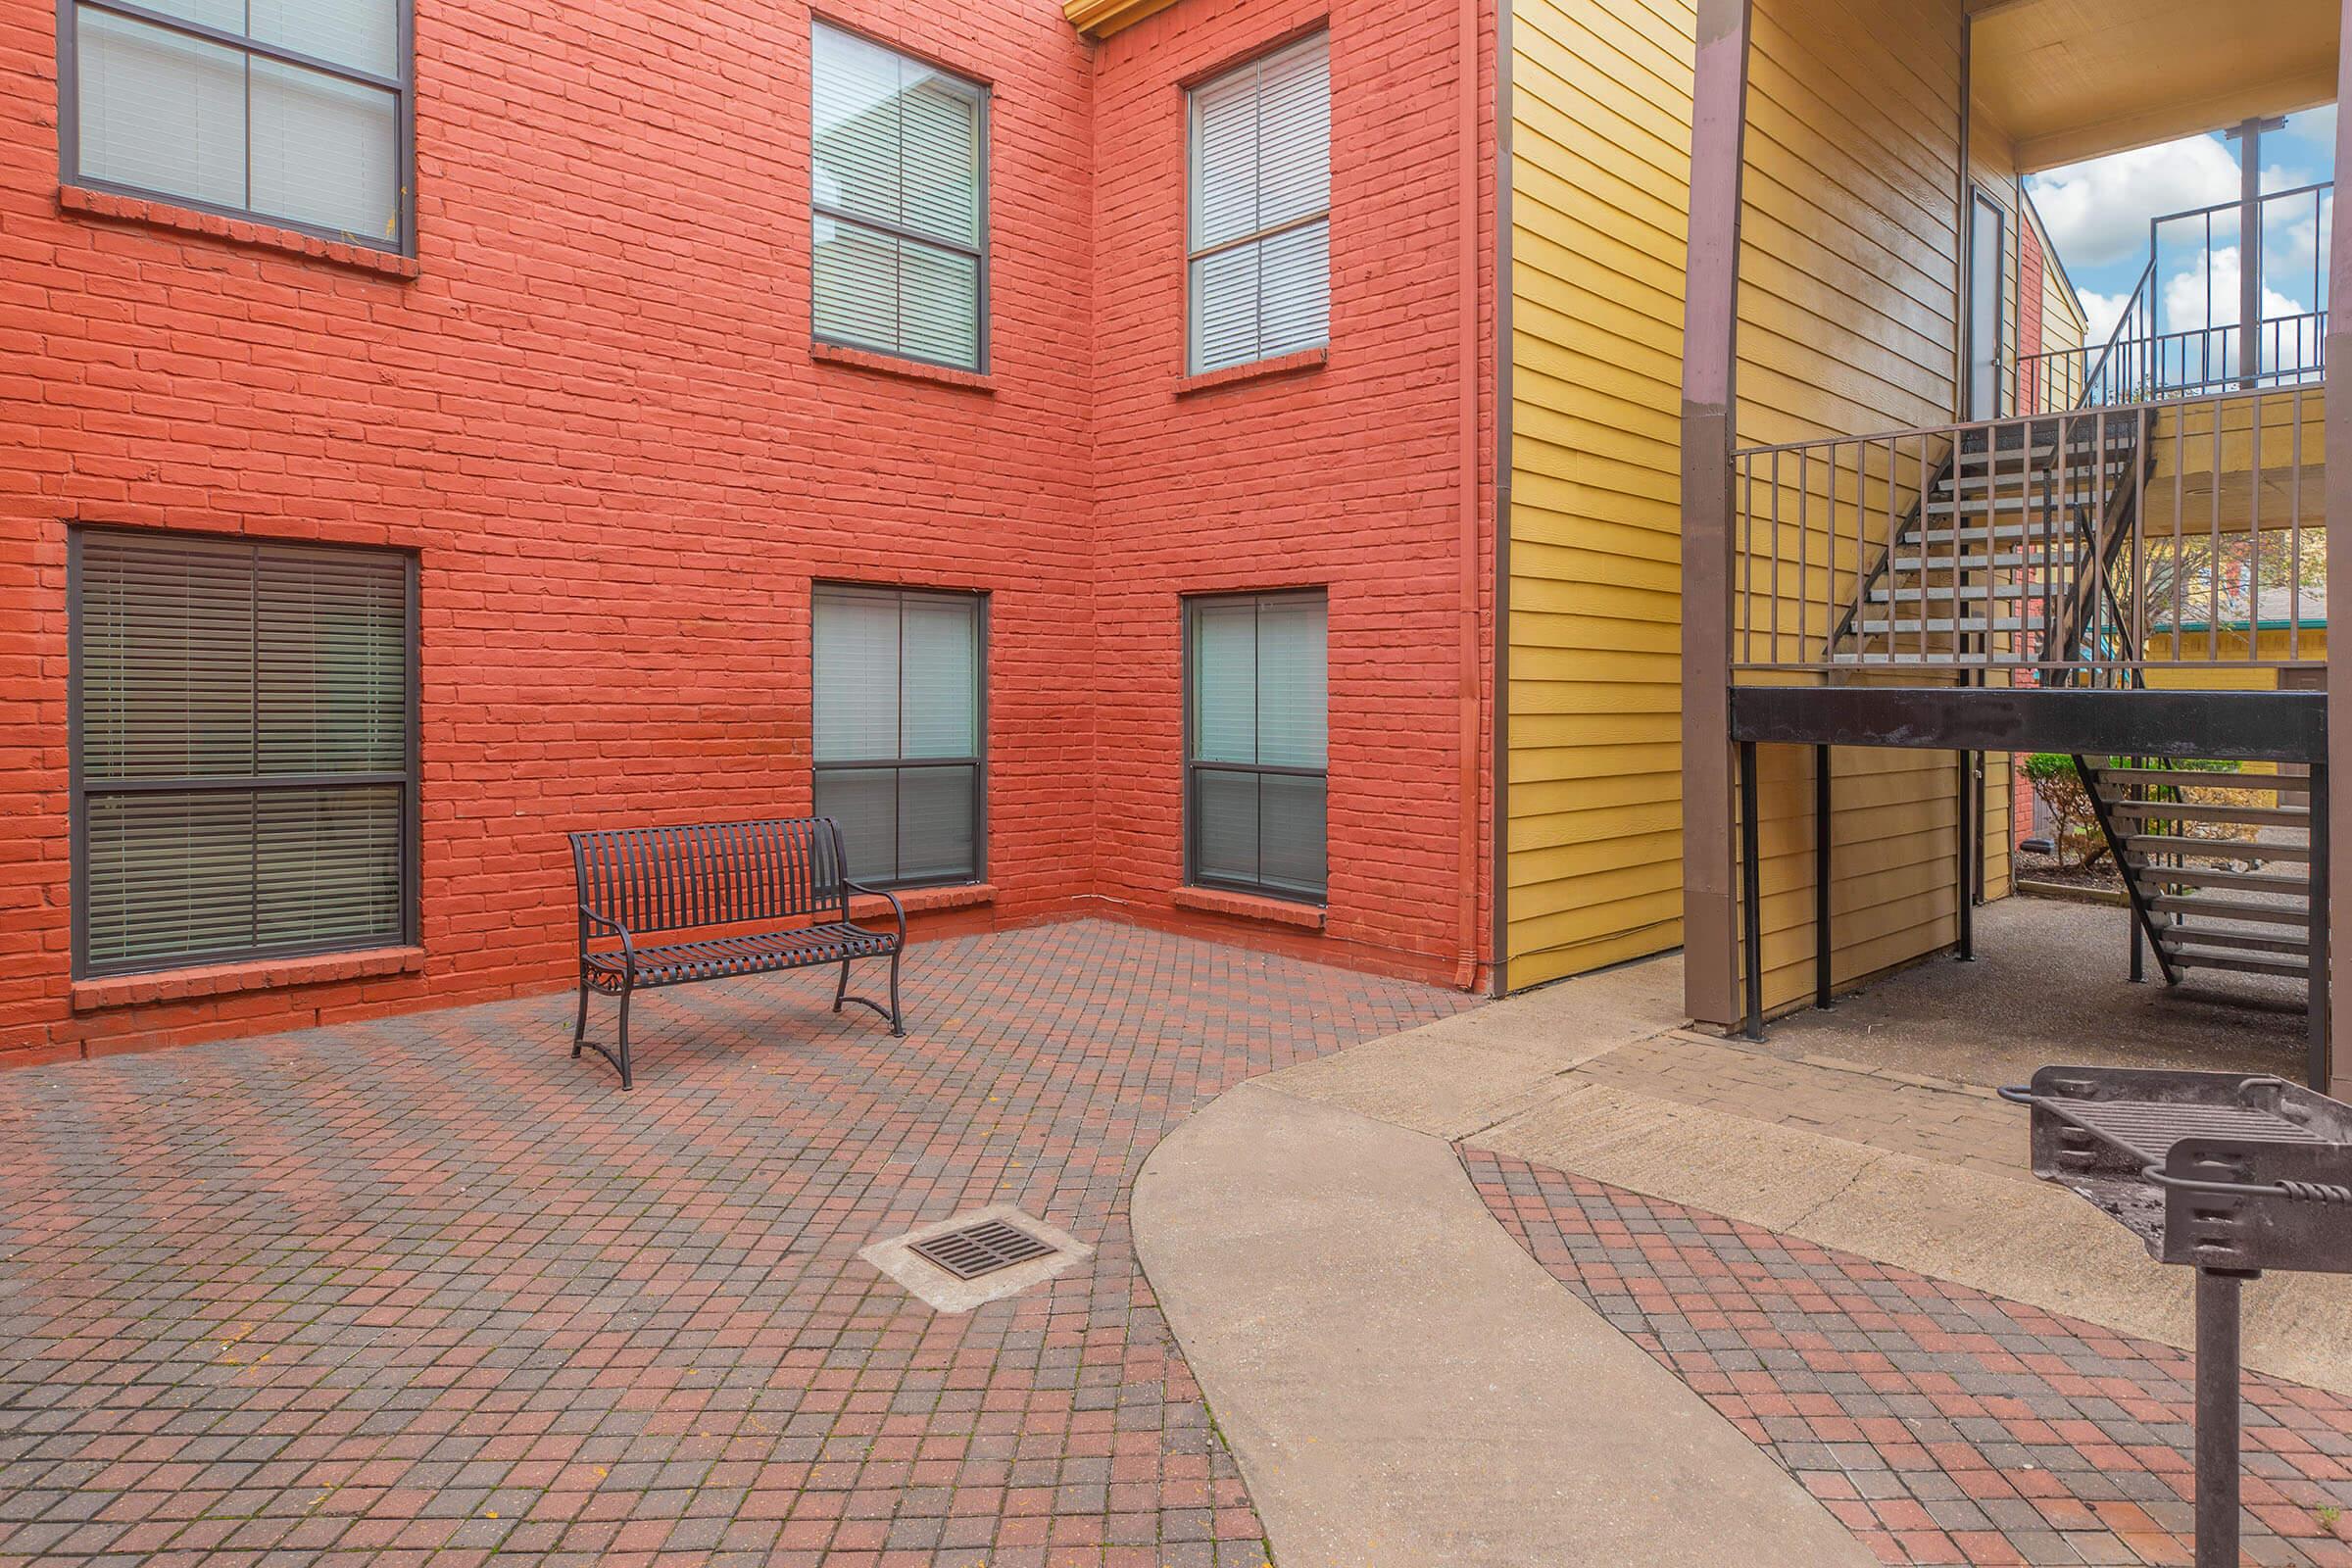 a bench in front of a brick building